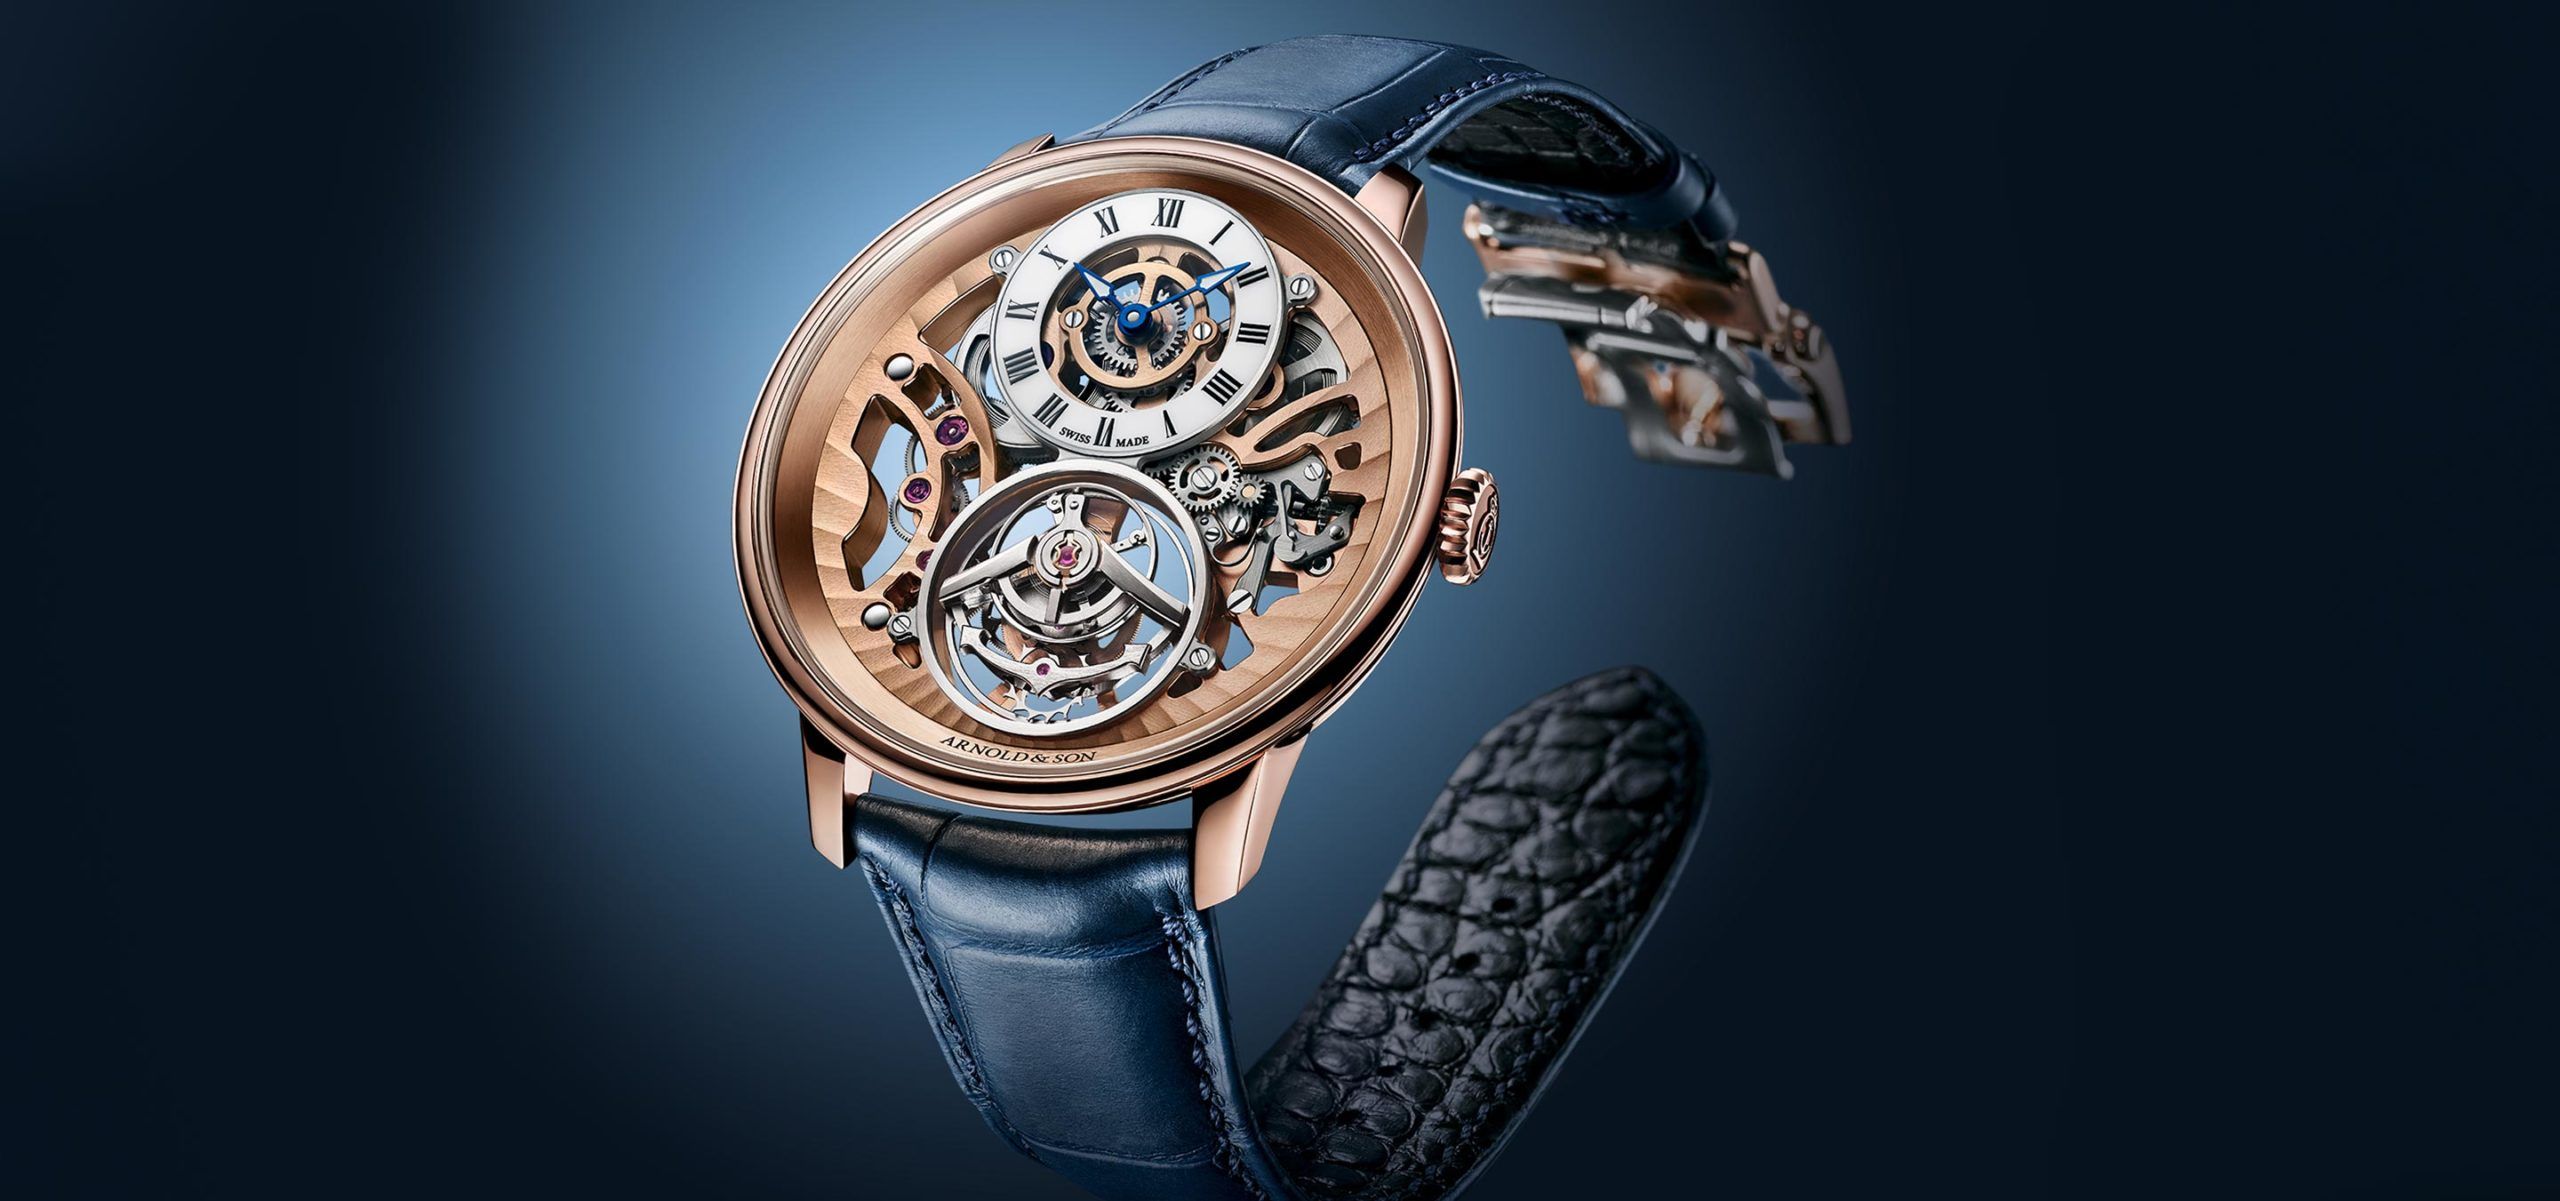 Introducing The Arnold & Son Ultrathin Tourbillon Skeleton Red Gold And Platinum